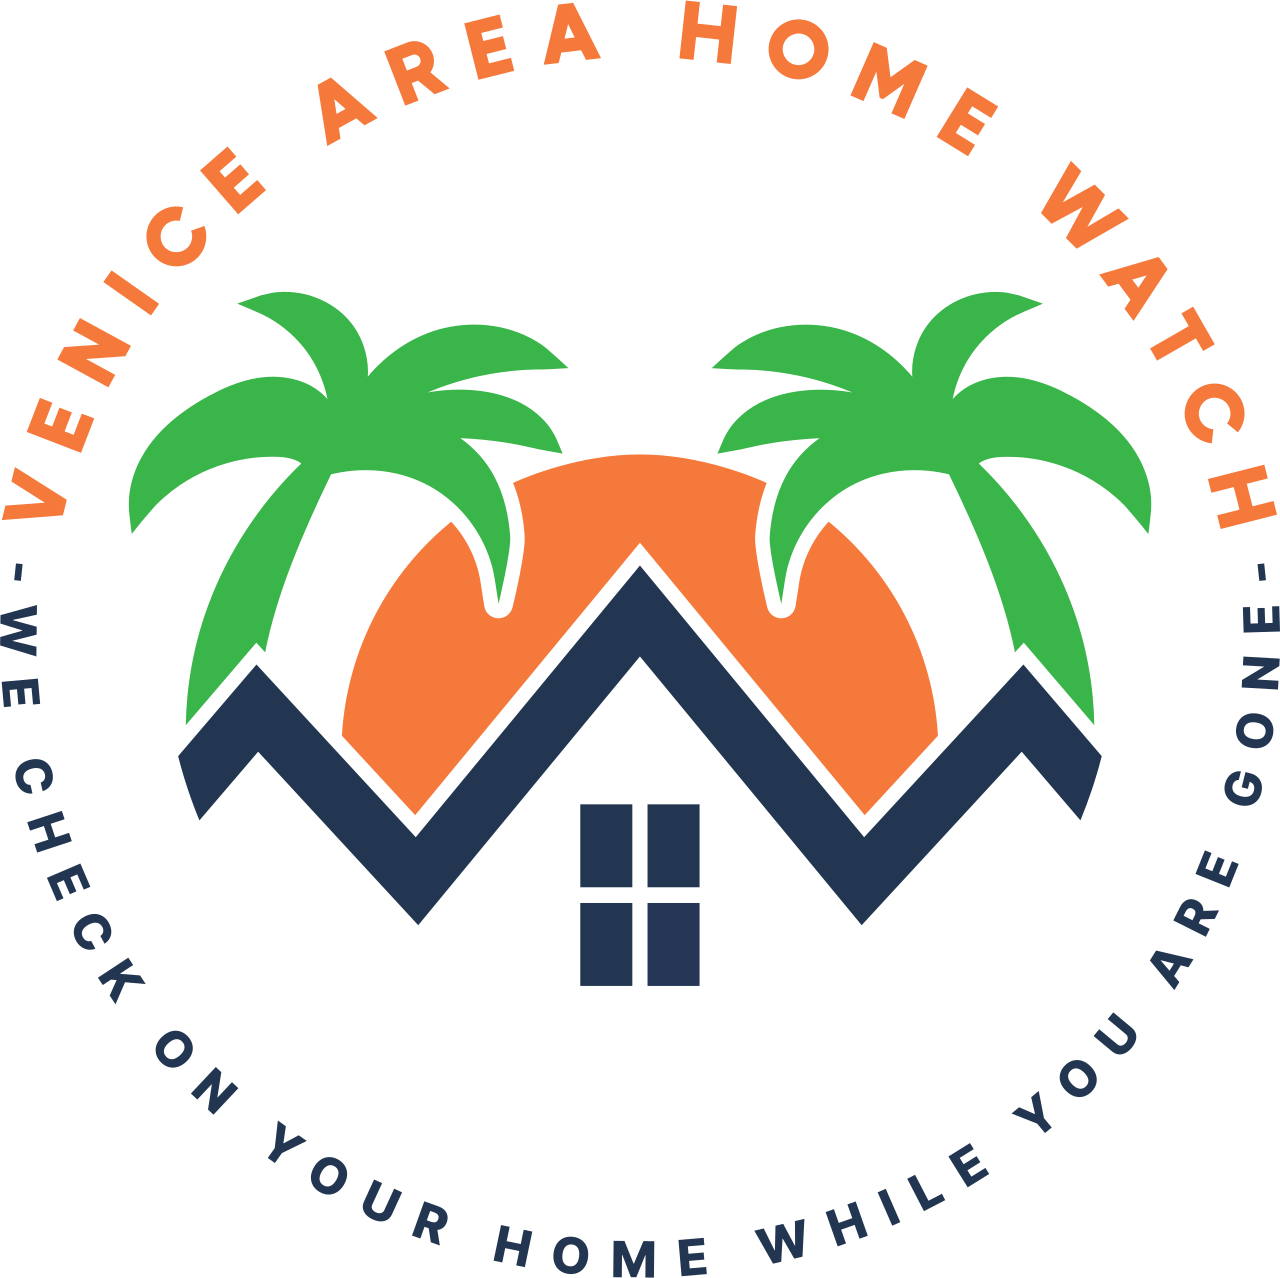 VENICE AREA HOME WATCH's web page